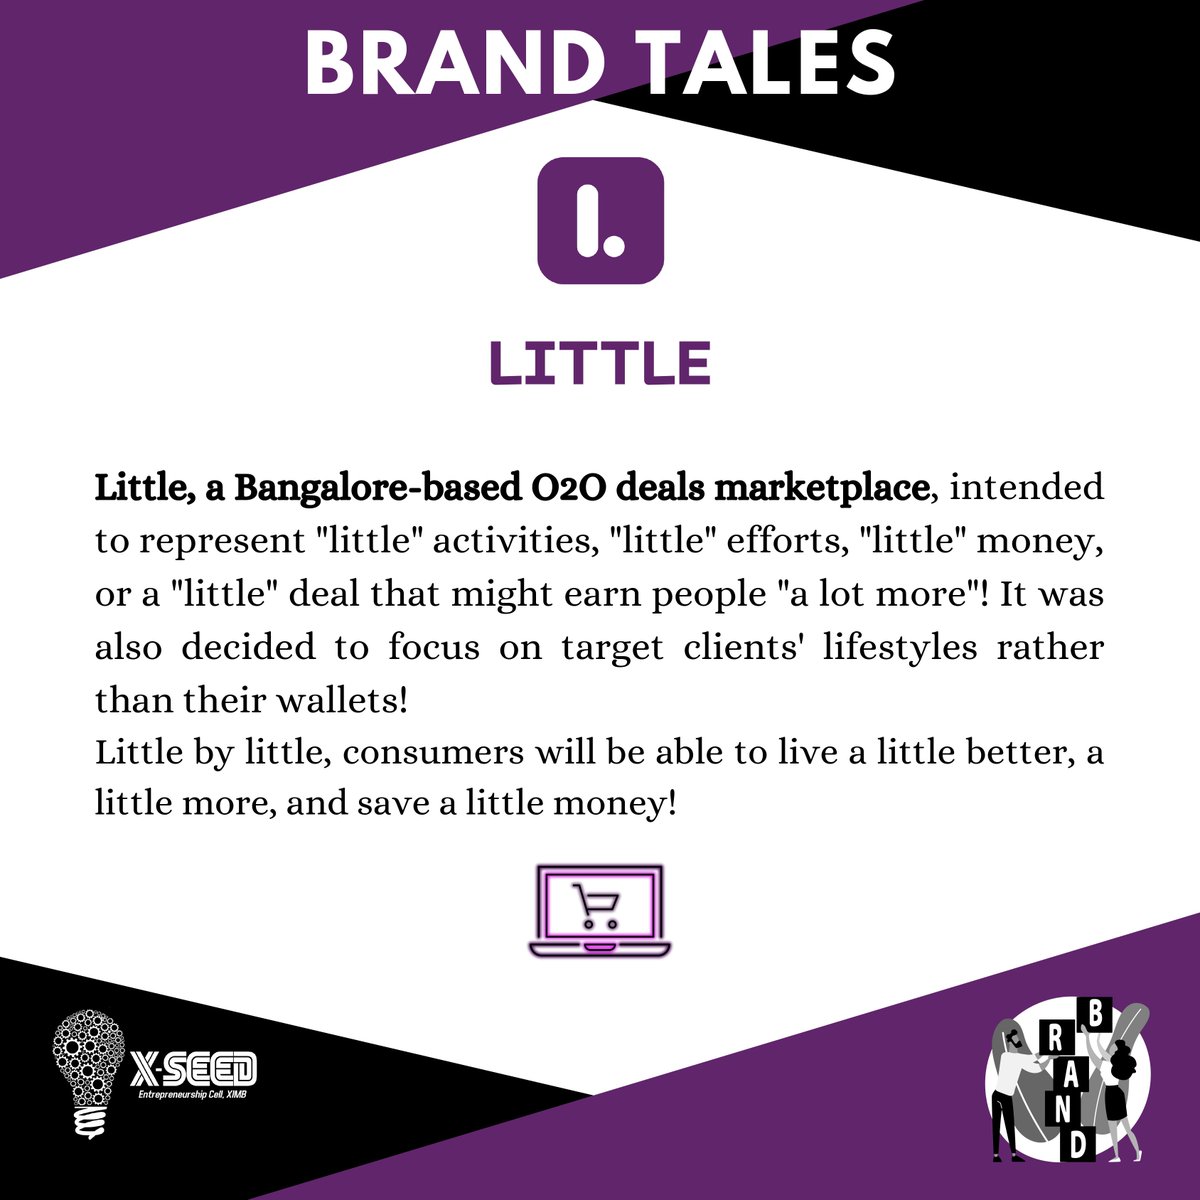 The Brand Tales: The startup you know, the story you don't...

The best way to achieve big goals is to take small steps. Here is a brand that helps to earn a lot mot with small efforts.

#little #O2O #brandtales #entrepreneur #entrepreneurship #business #savings #ximb #XSEED